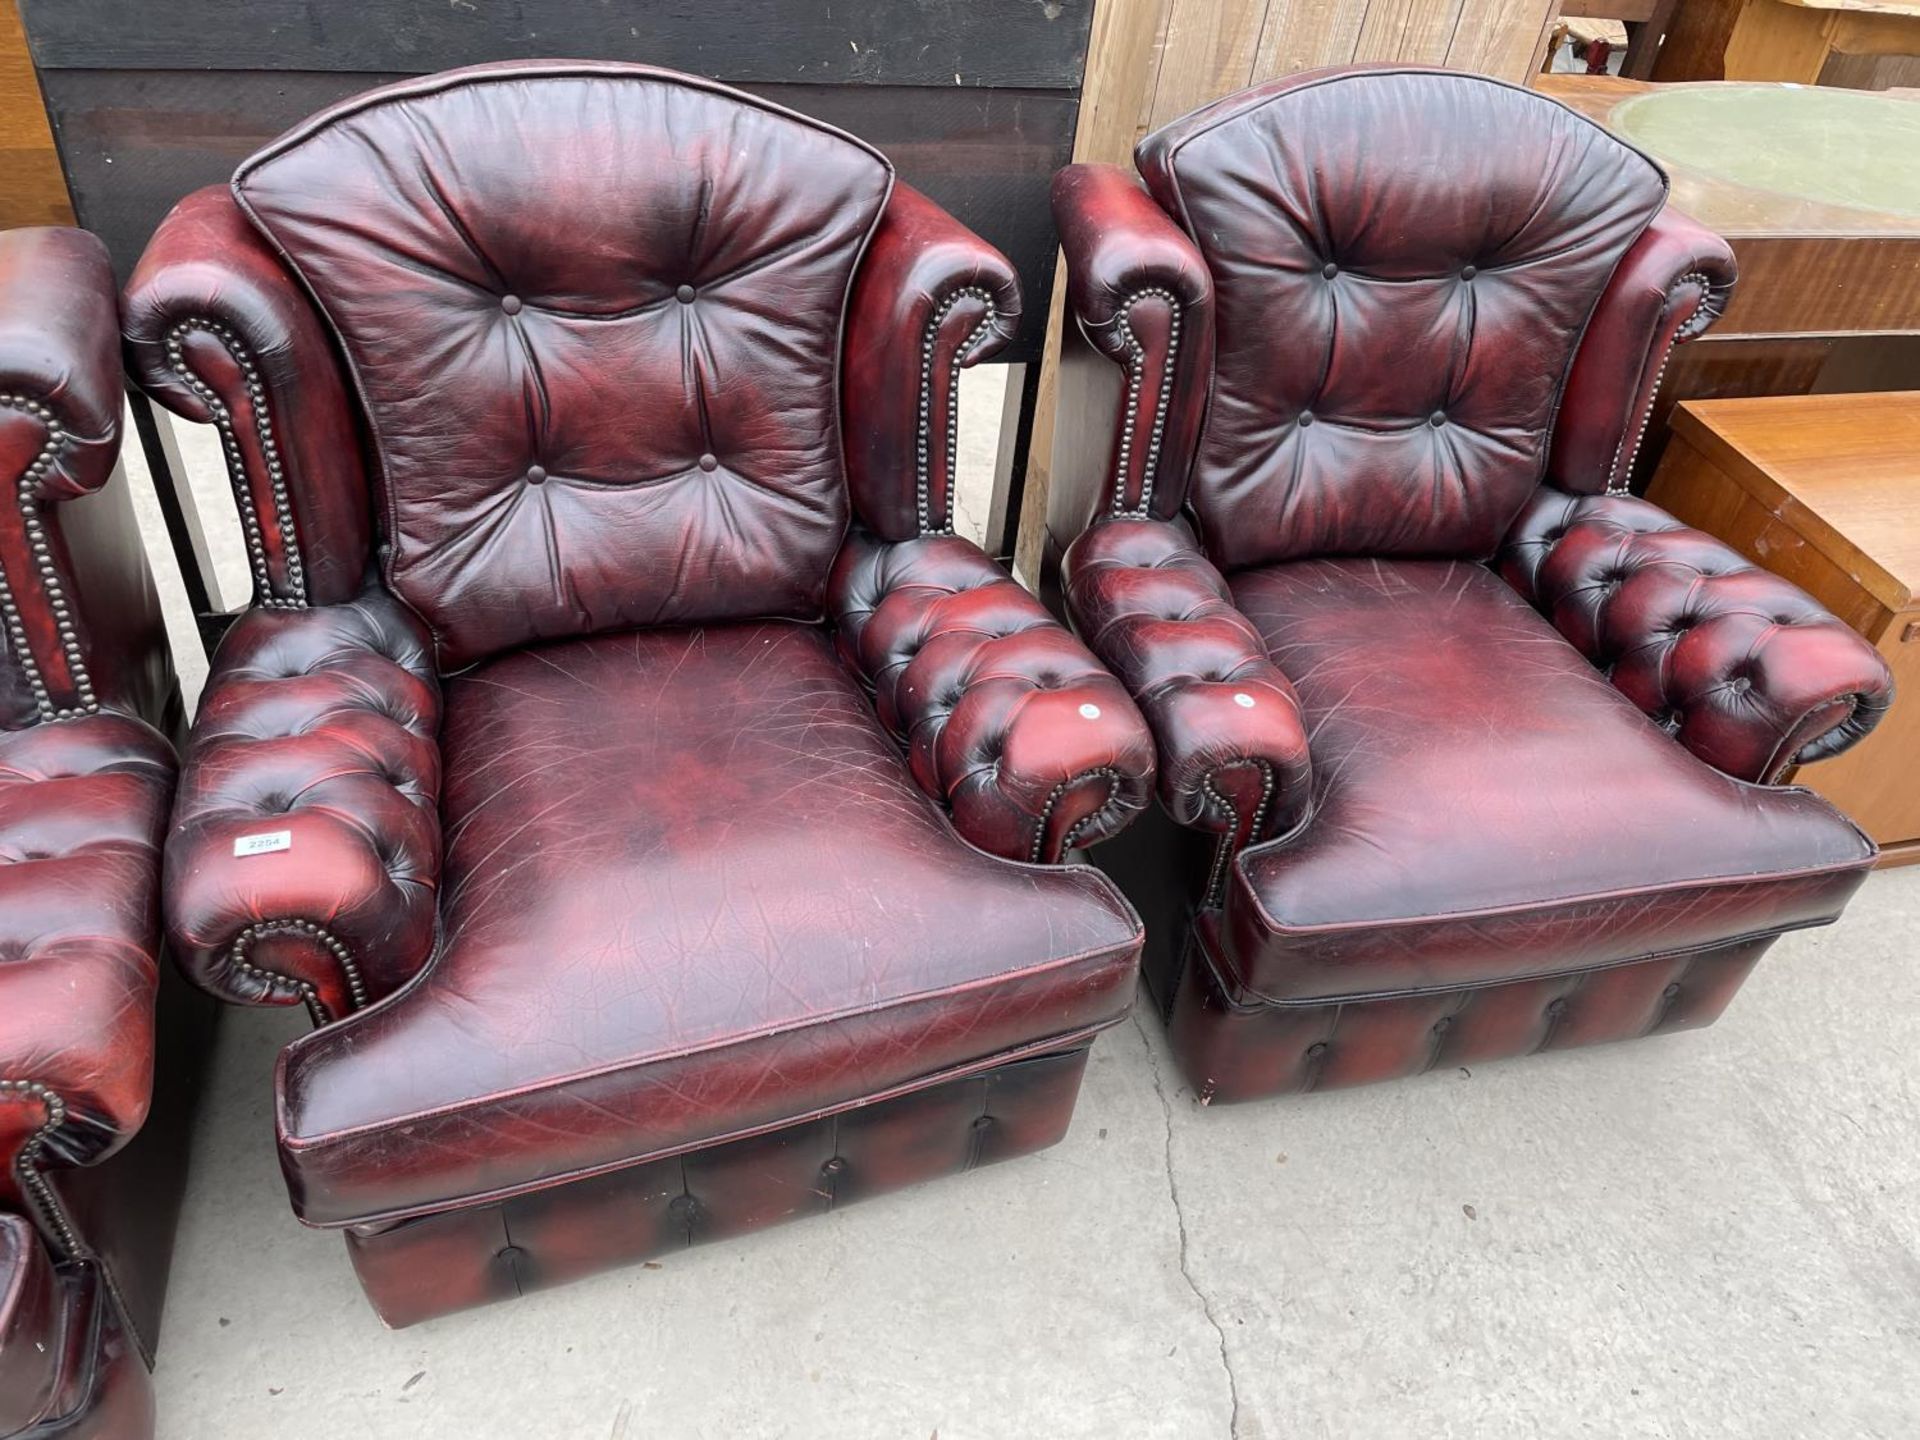 TWO OXBLOOD LEATHER ARMCHAIRS WITH BUTTONED BACK AND ARMS